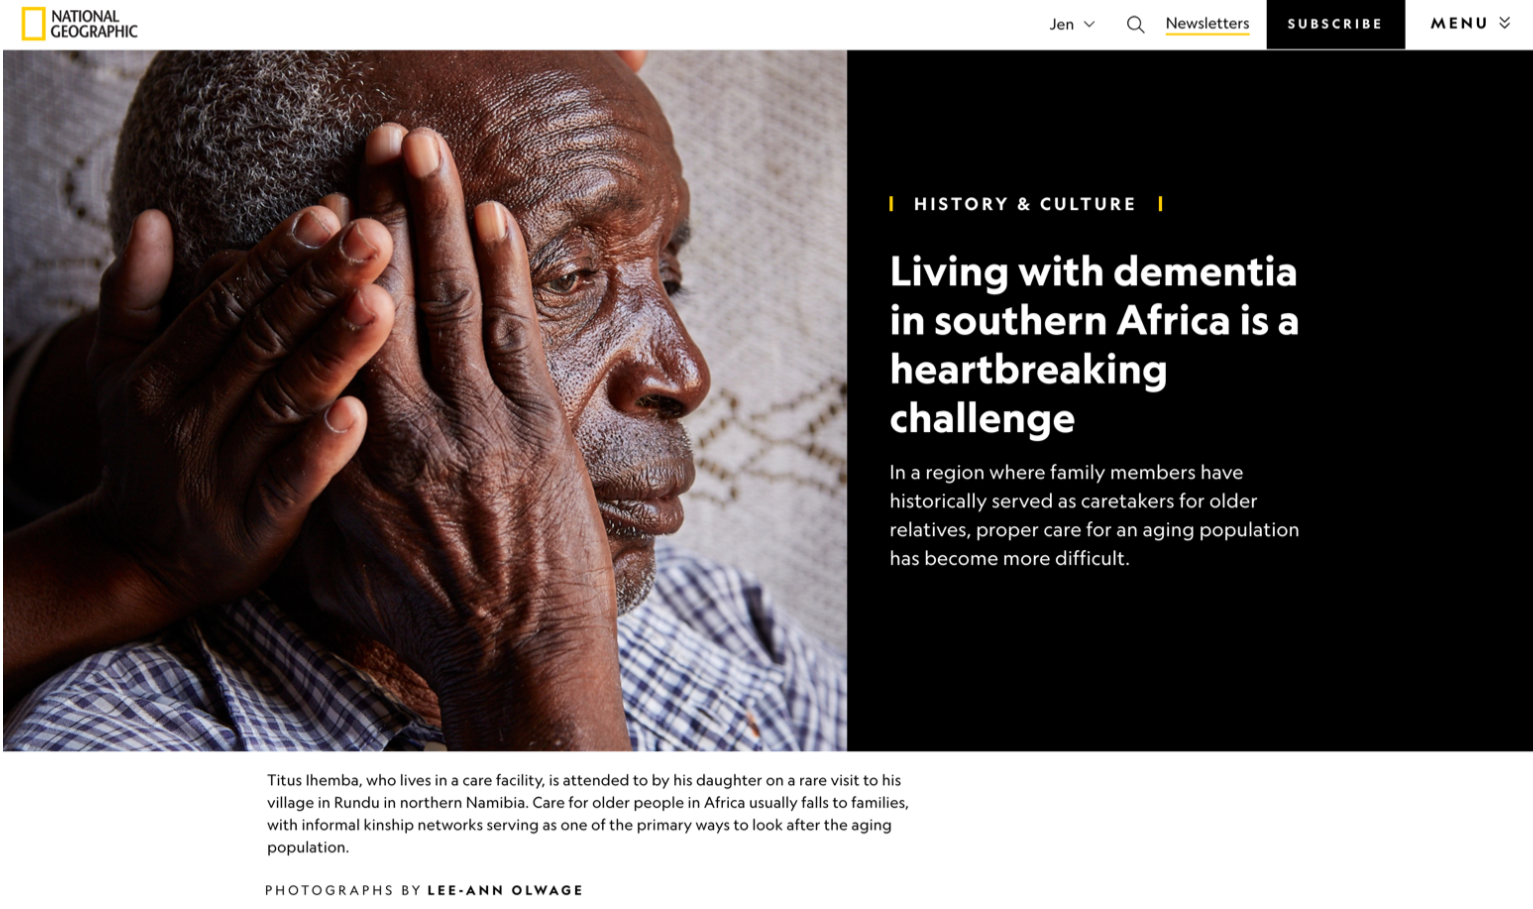  Commissioned longform photo feature for Nat Geo digital. Photographs by Lee-Ann Olwage. 